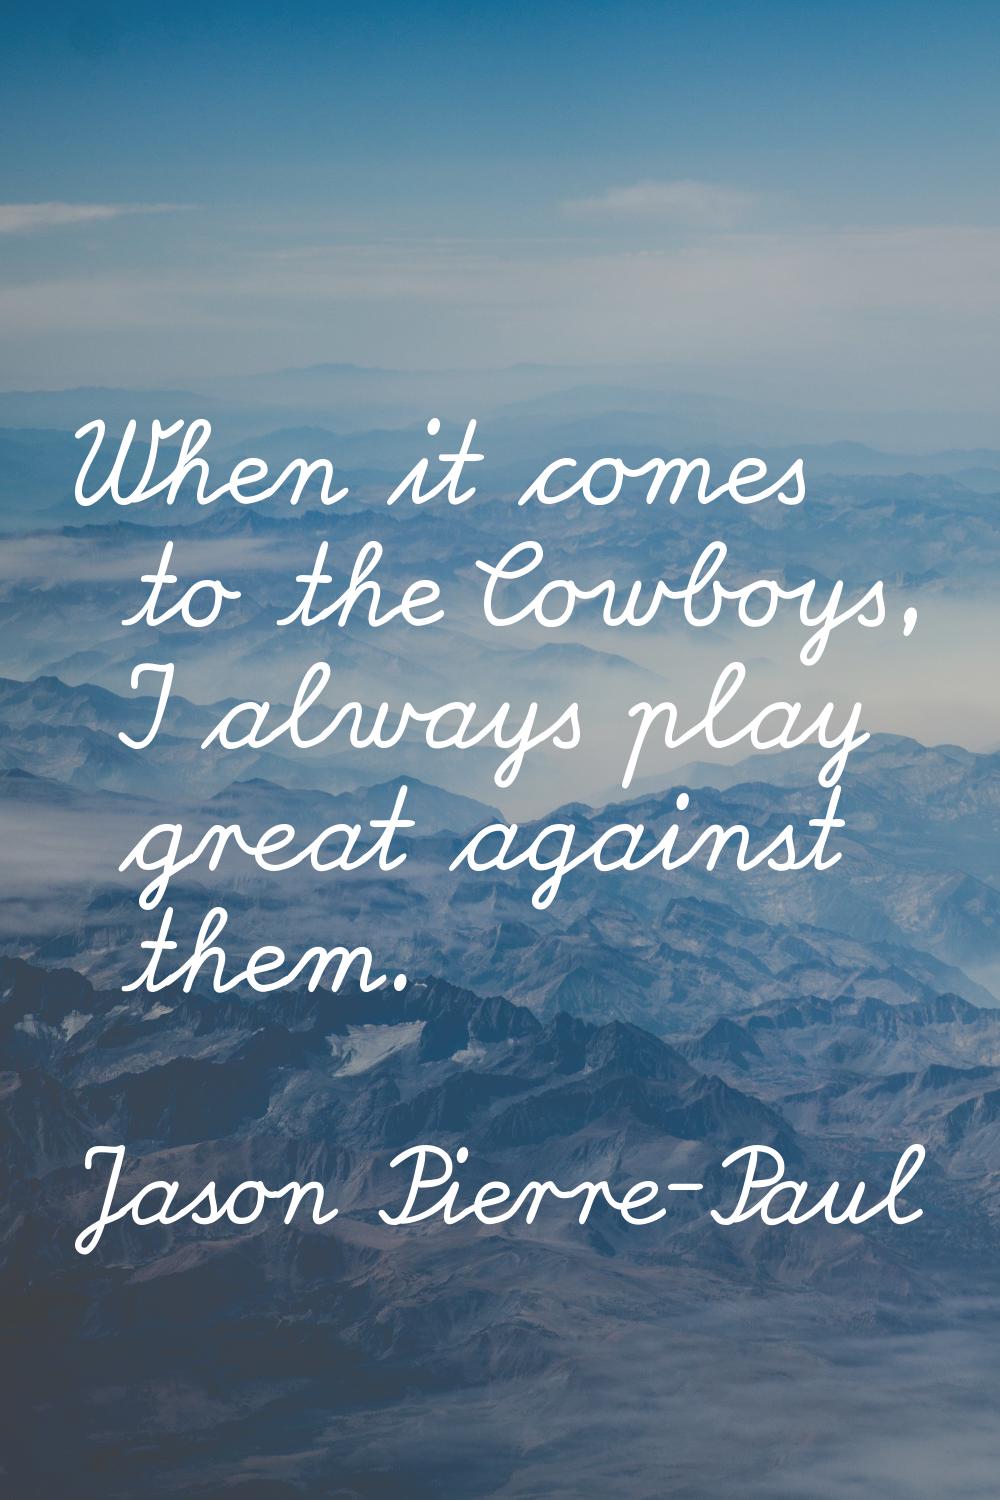 When it comes to the Cowboys, I always play great against them.